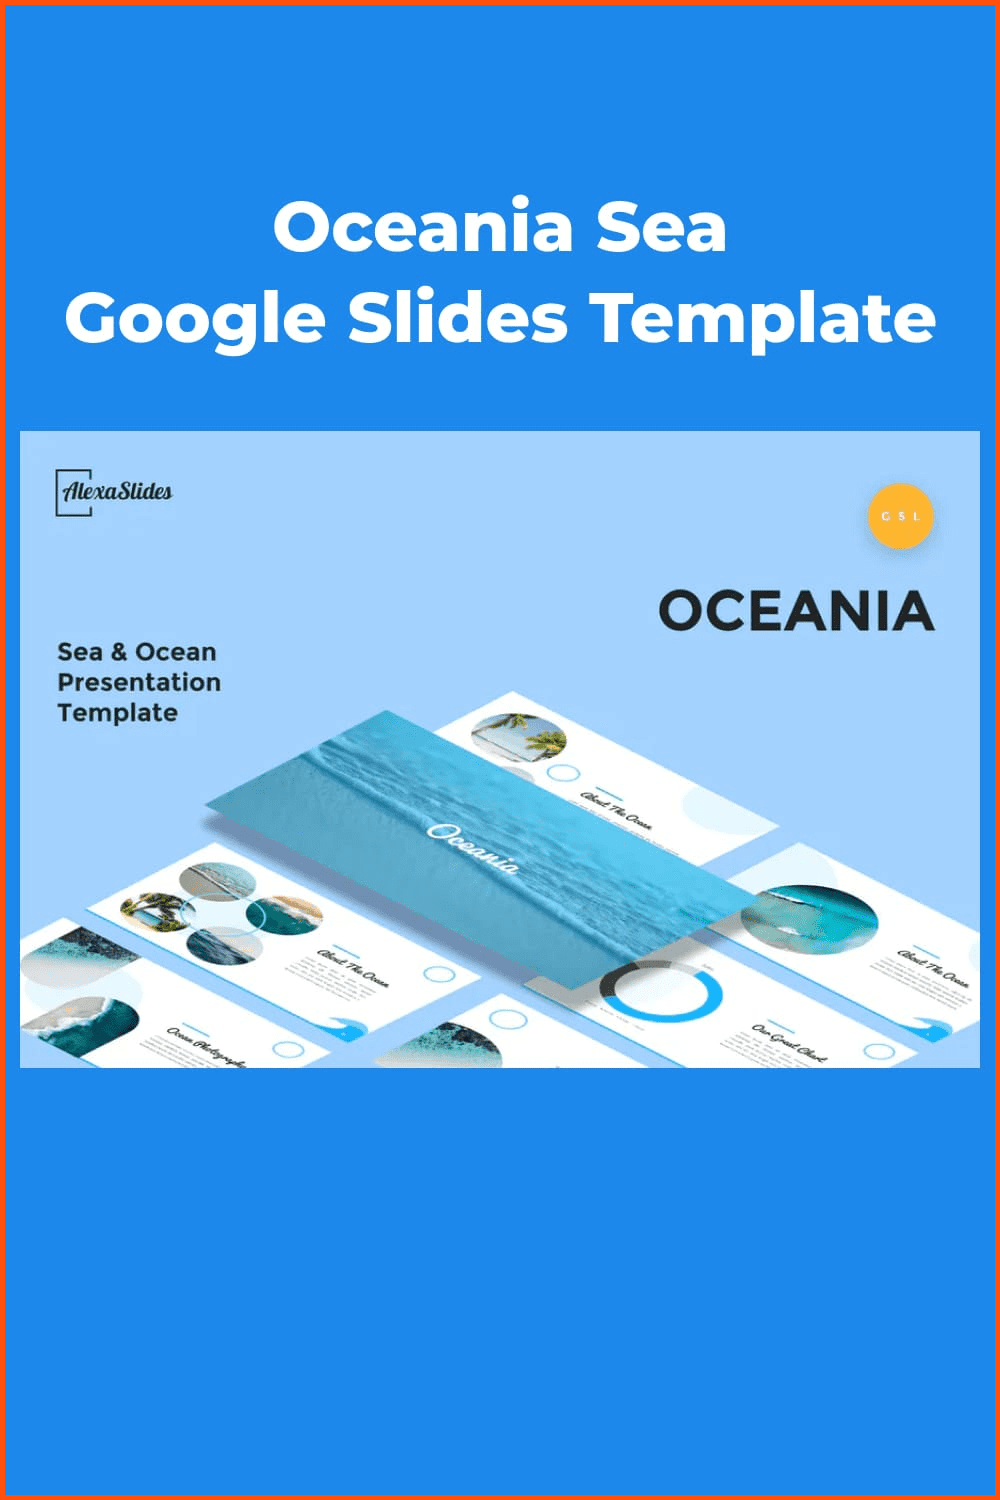 This template has stunning design concepts that bring a creative and unique feel to every slide.